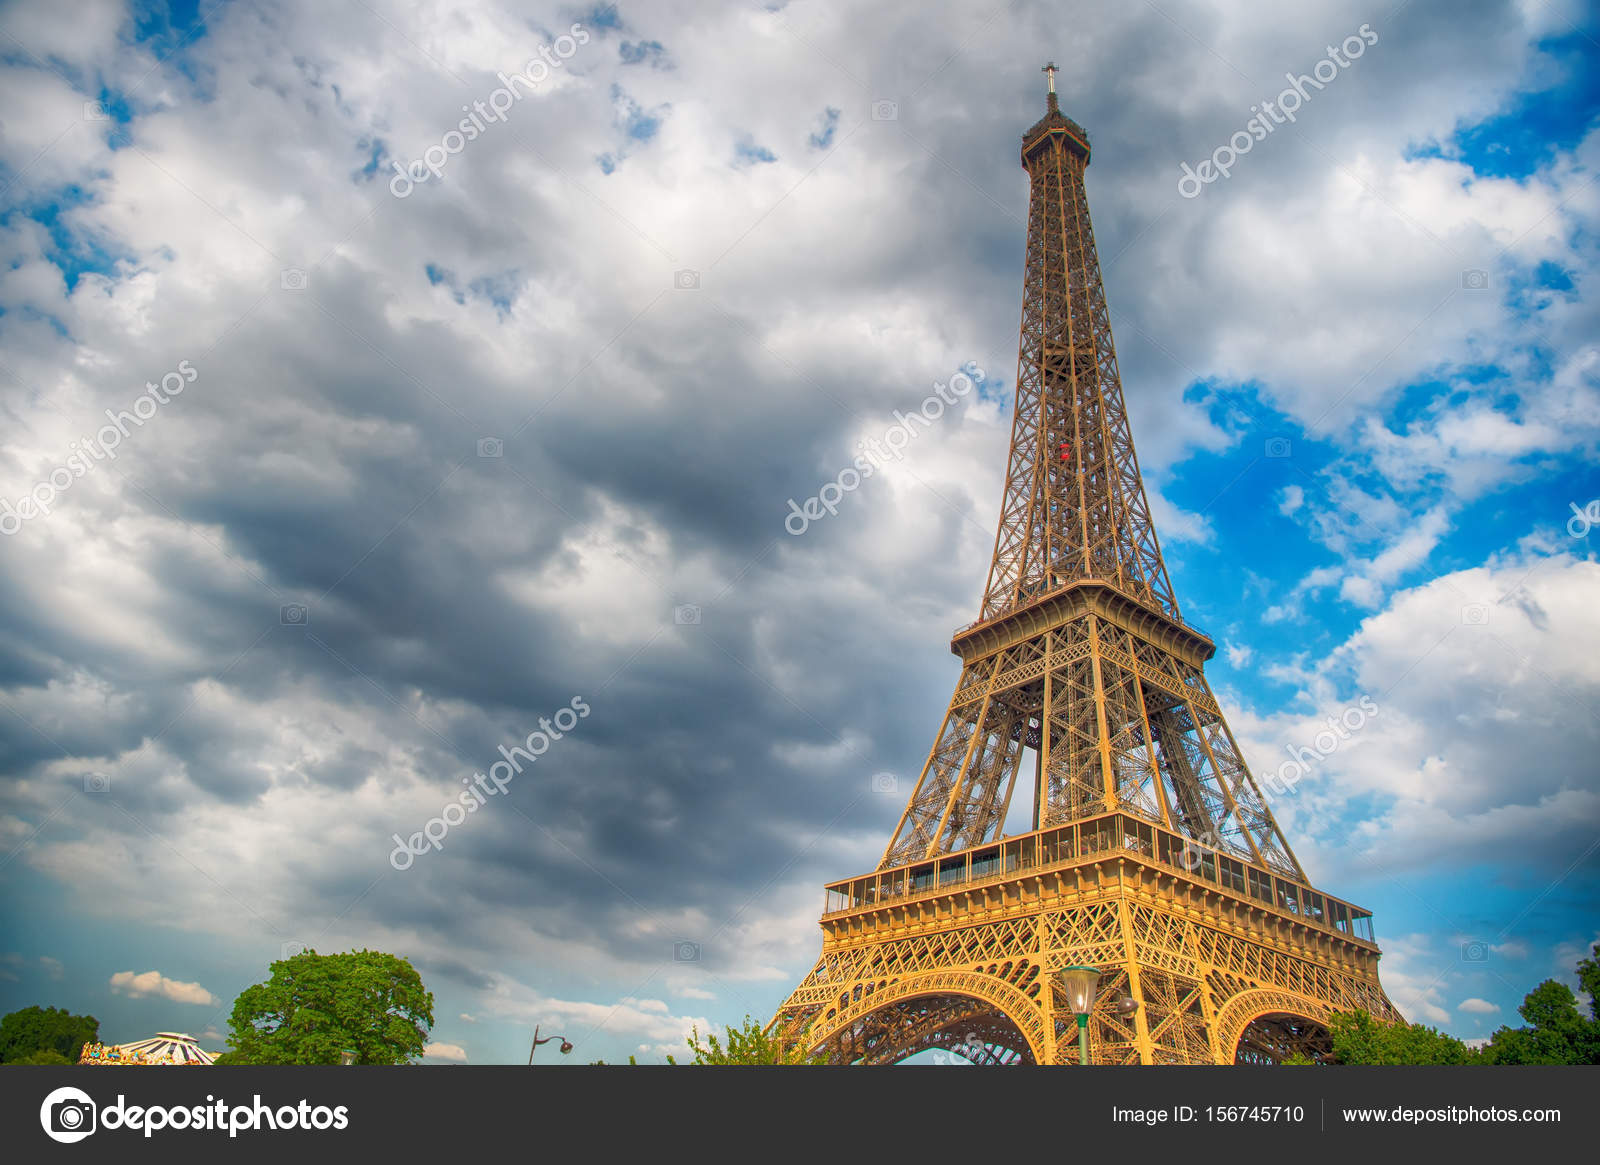 Eiffel Tower at sunset in Paris, France. HDR Romantic travel background